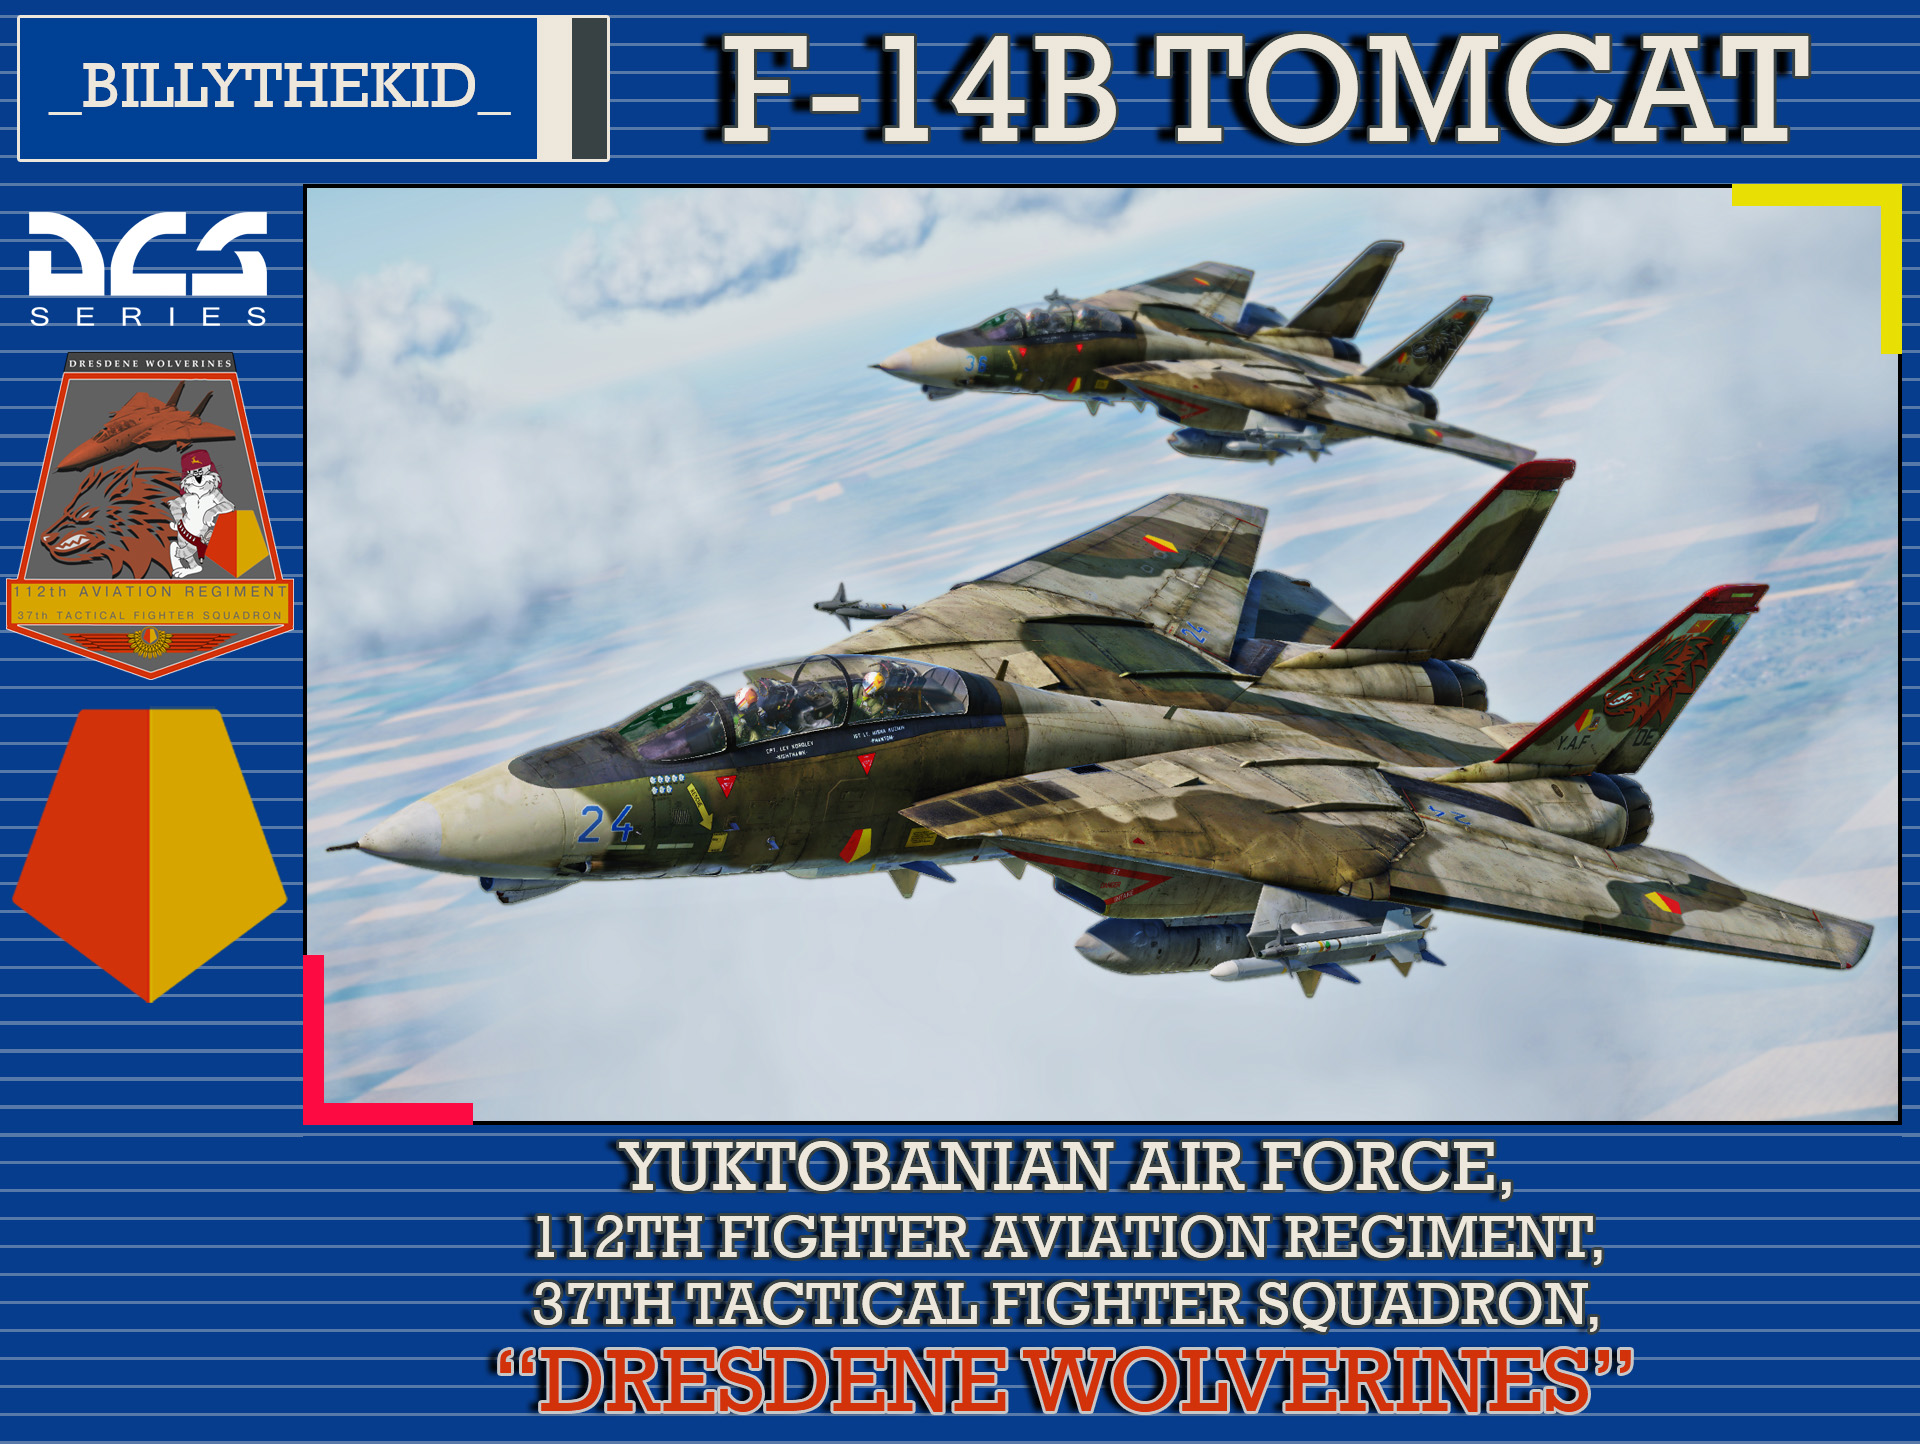 Ace Combat - Yuktobanian Air Force - 112th Aviation Regiment - 37th Tactical Fighter Squadron "Dresdene Wolverines" F-14B Tomcat